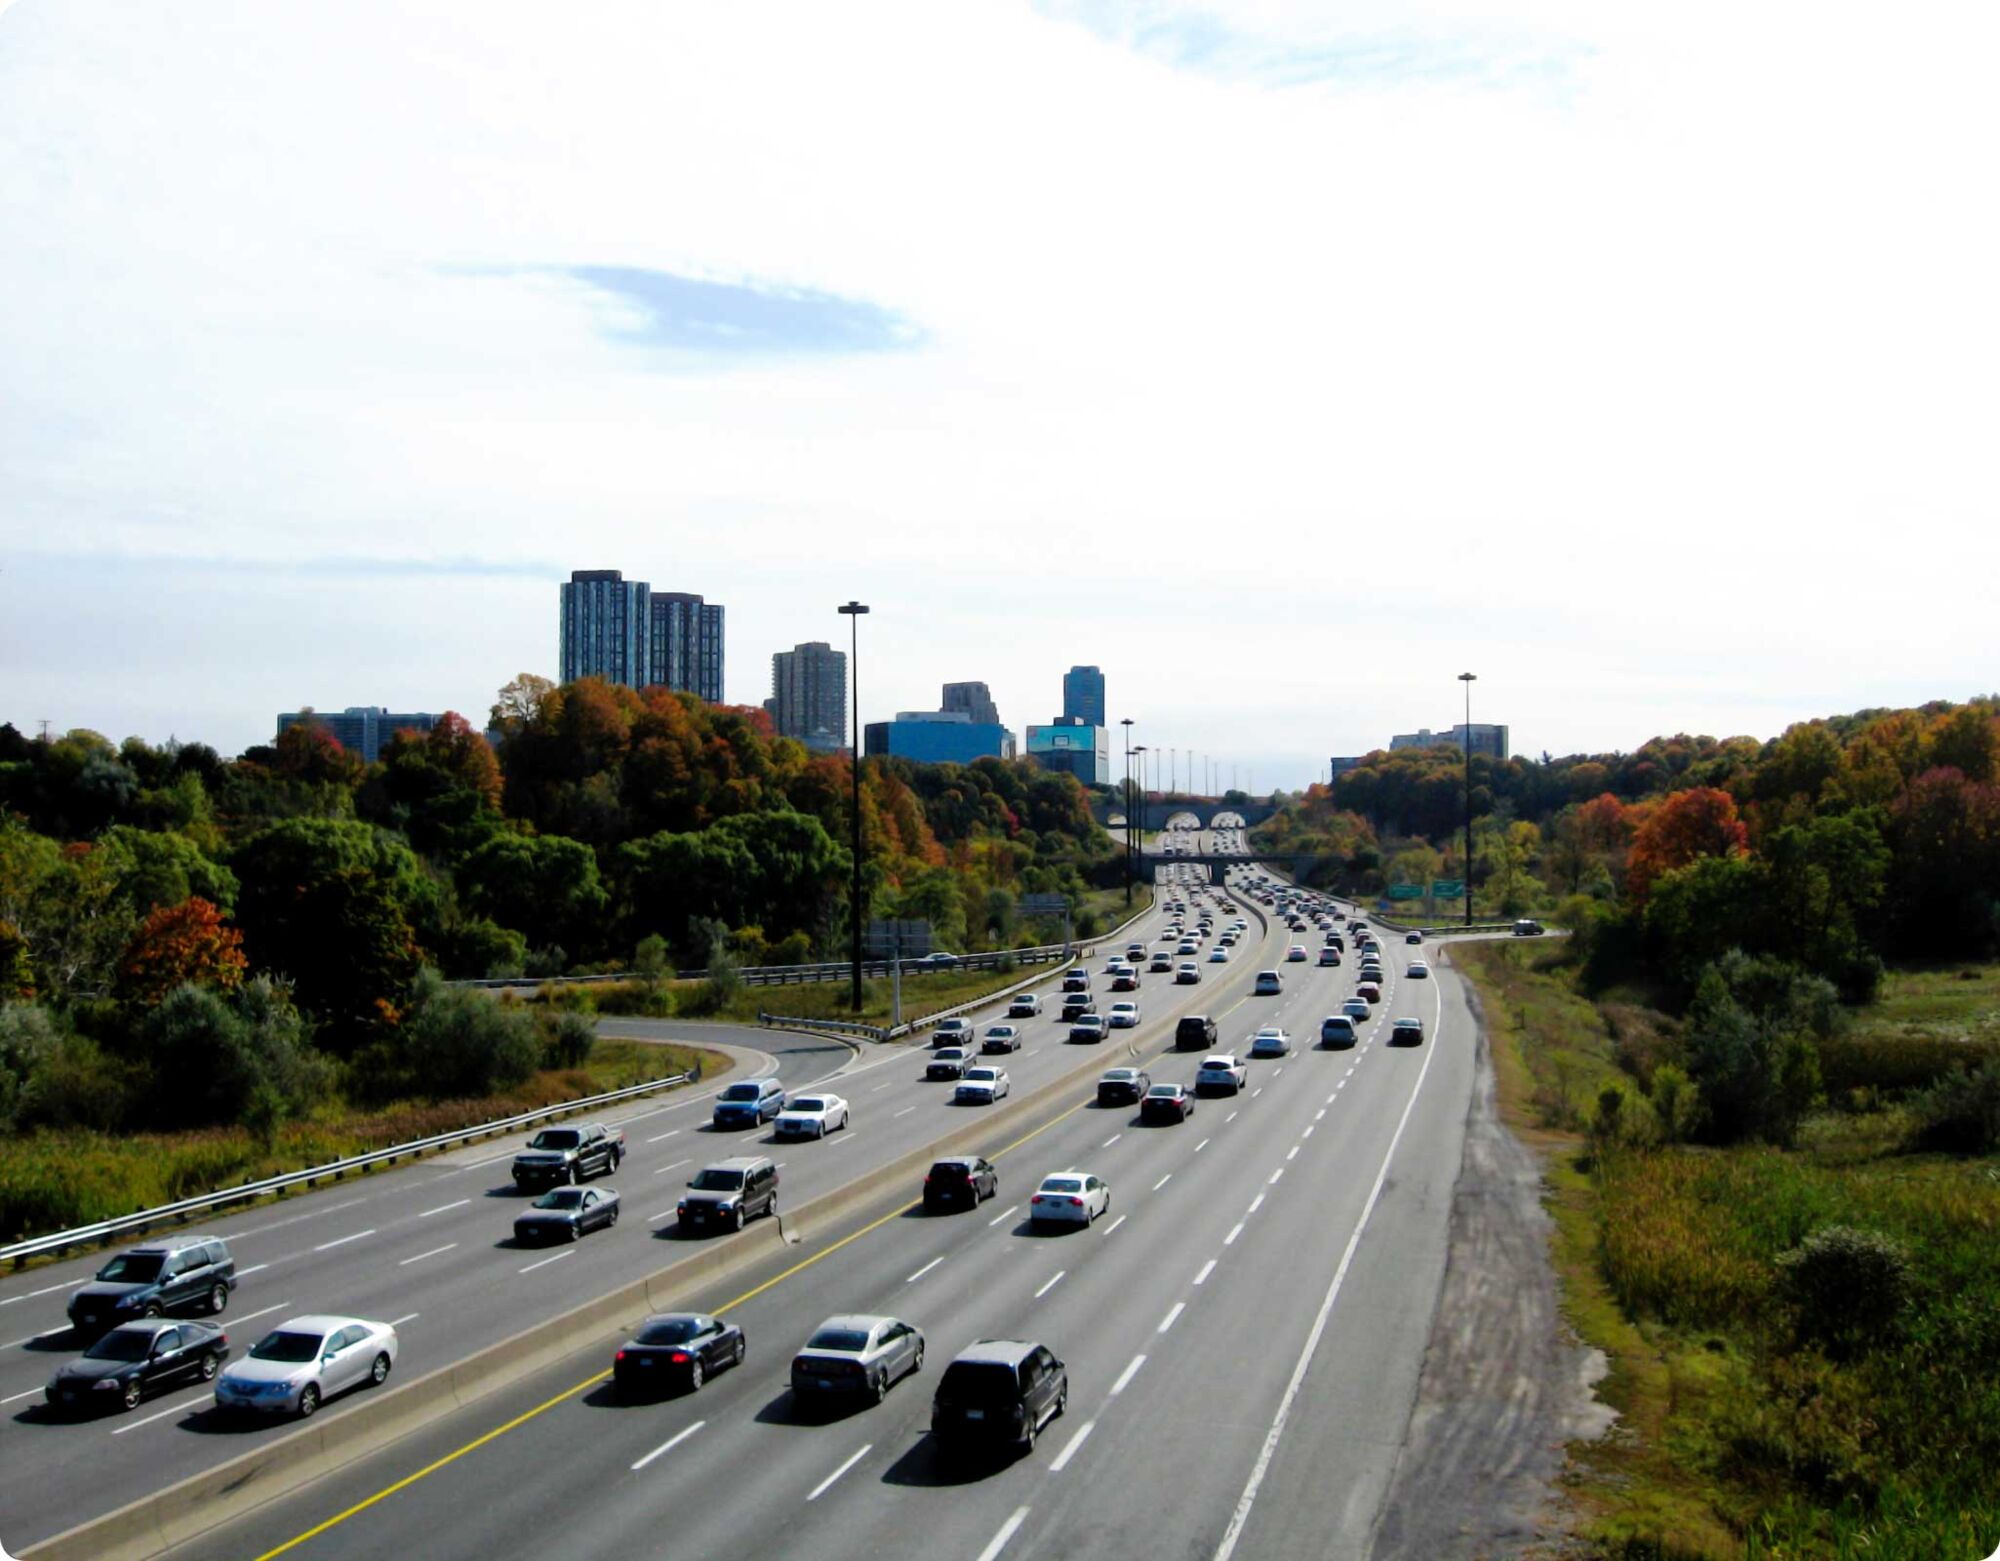 A busy highway with many cars driving past buildings and trees.